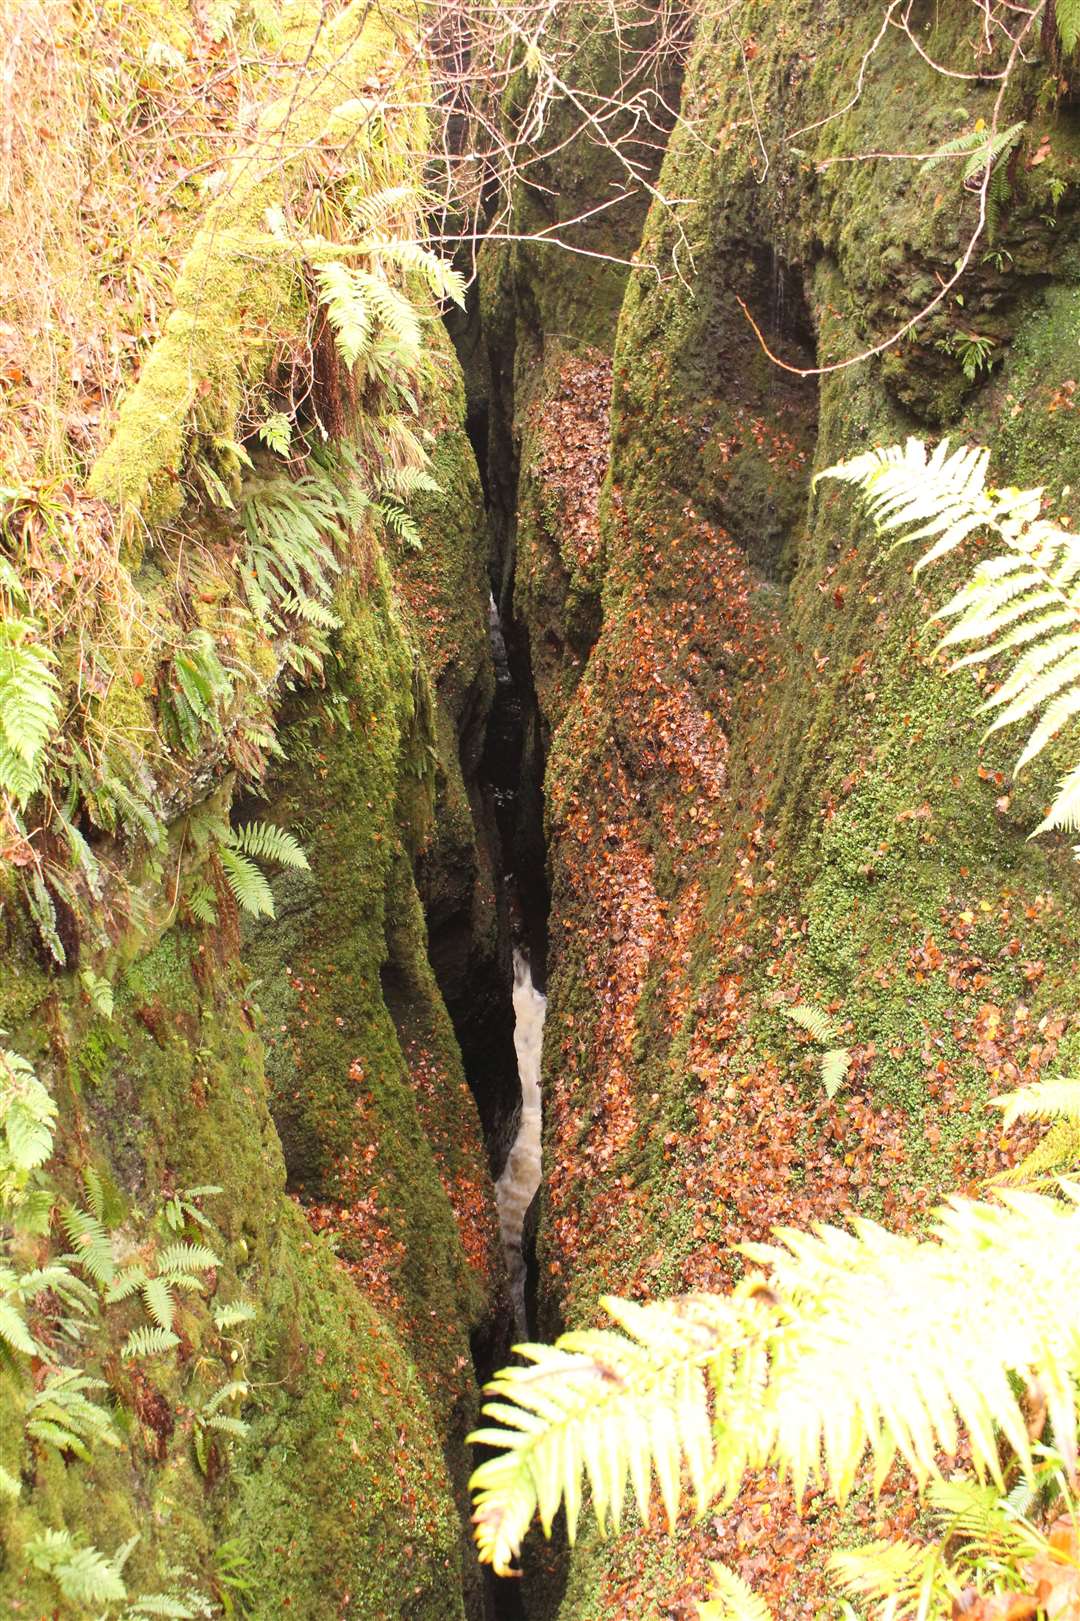 Into the chasm – the view down to the gorge from the bridge.